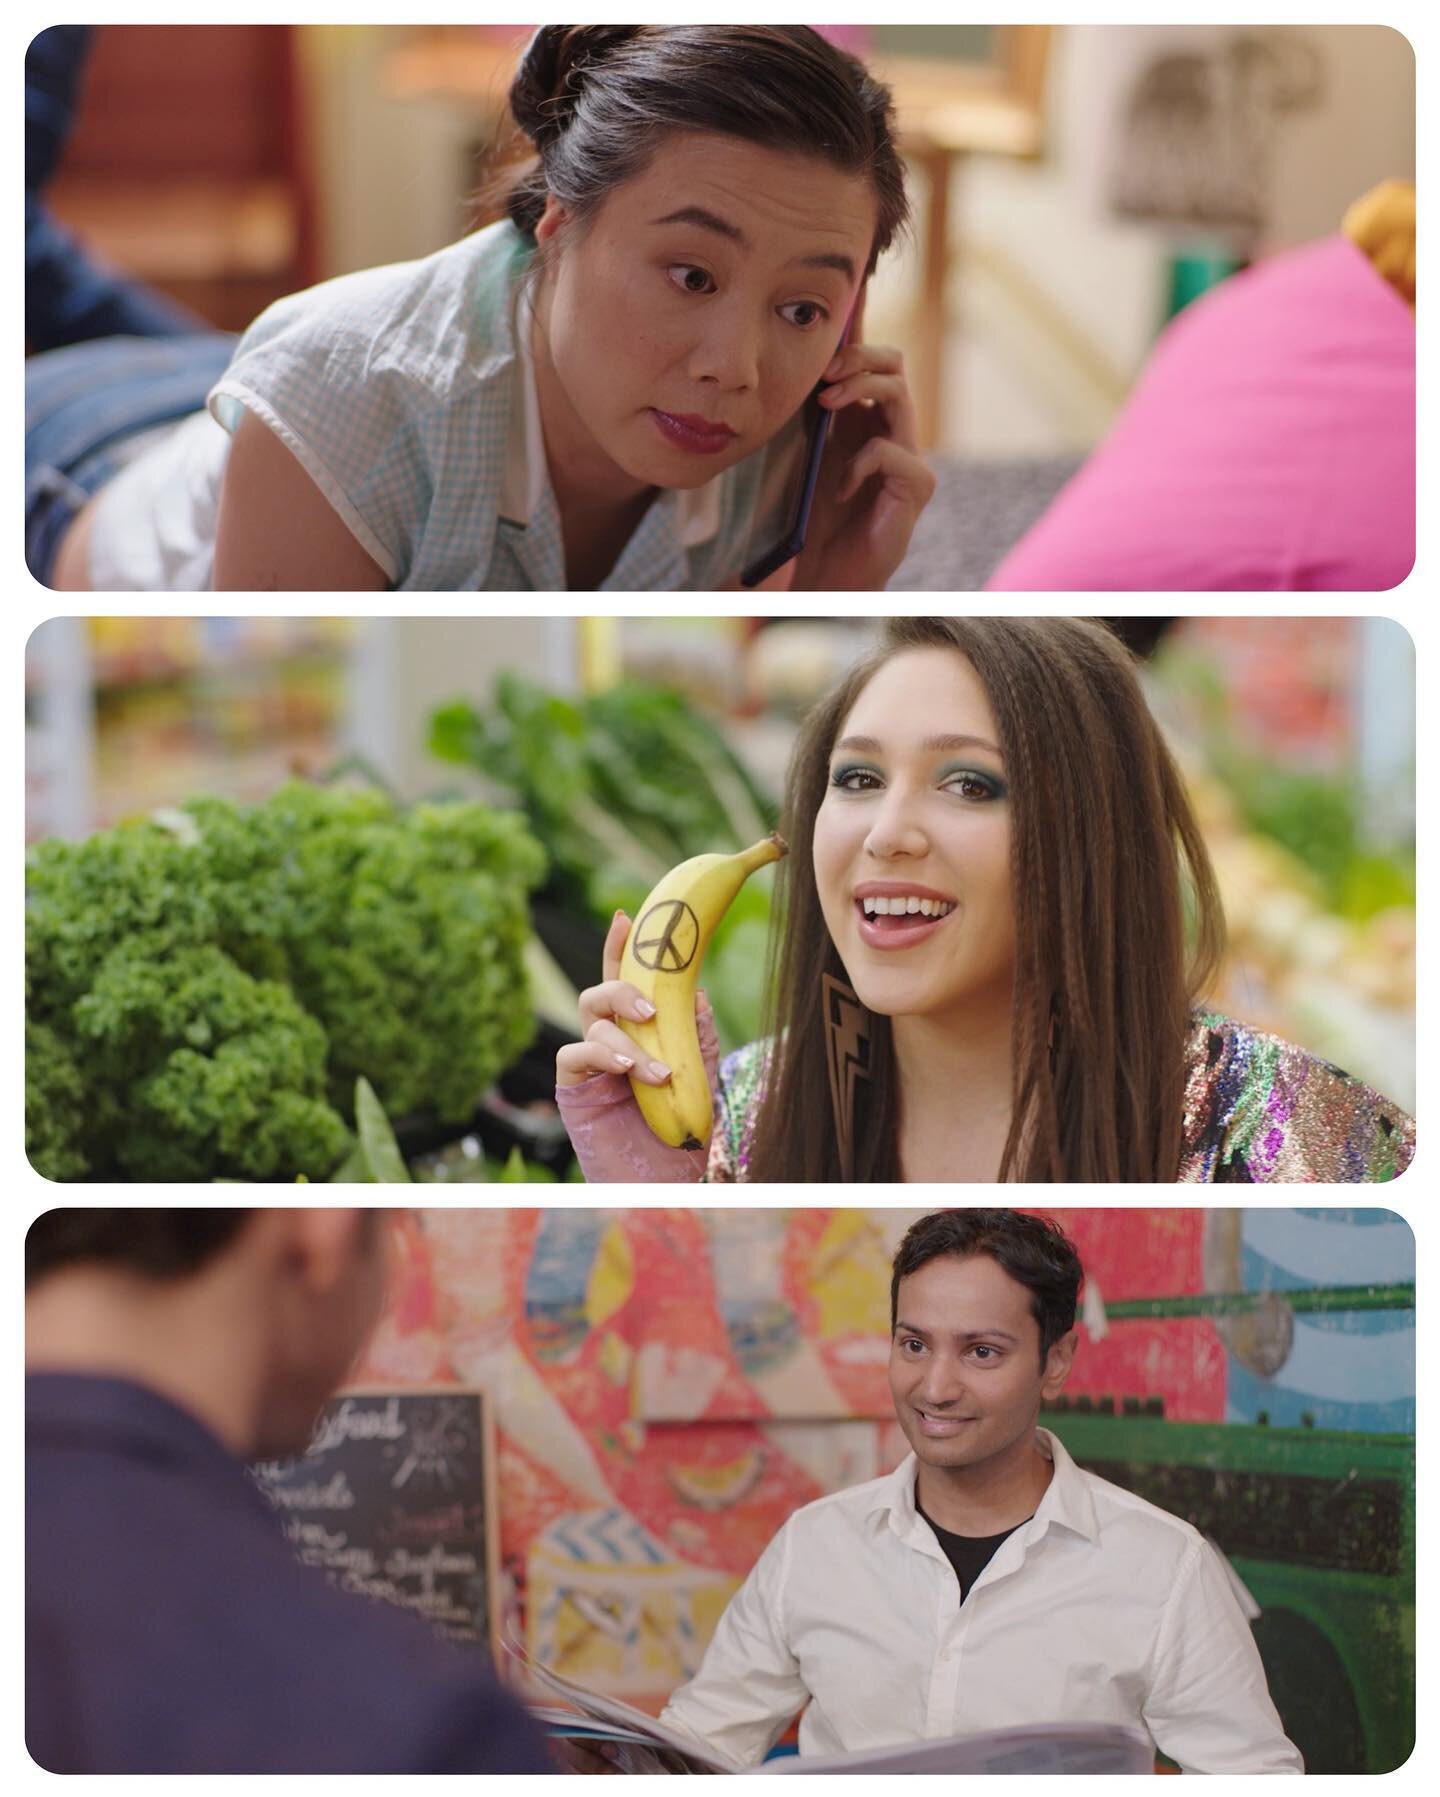 Some of my favorite frames from the feature I shot and edited. Now streaming on @aacta TV. Voting opens Oct 4th! #indiefilm #australianromcom #featurefilms #arrialexaminilf #cinematography #filmeditor